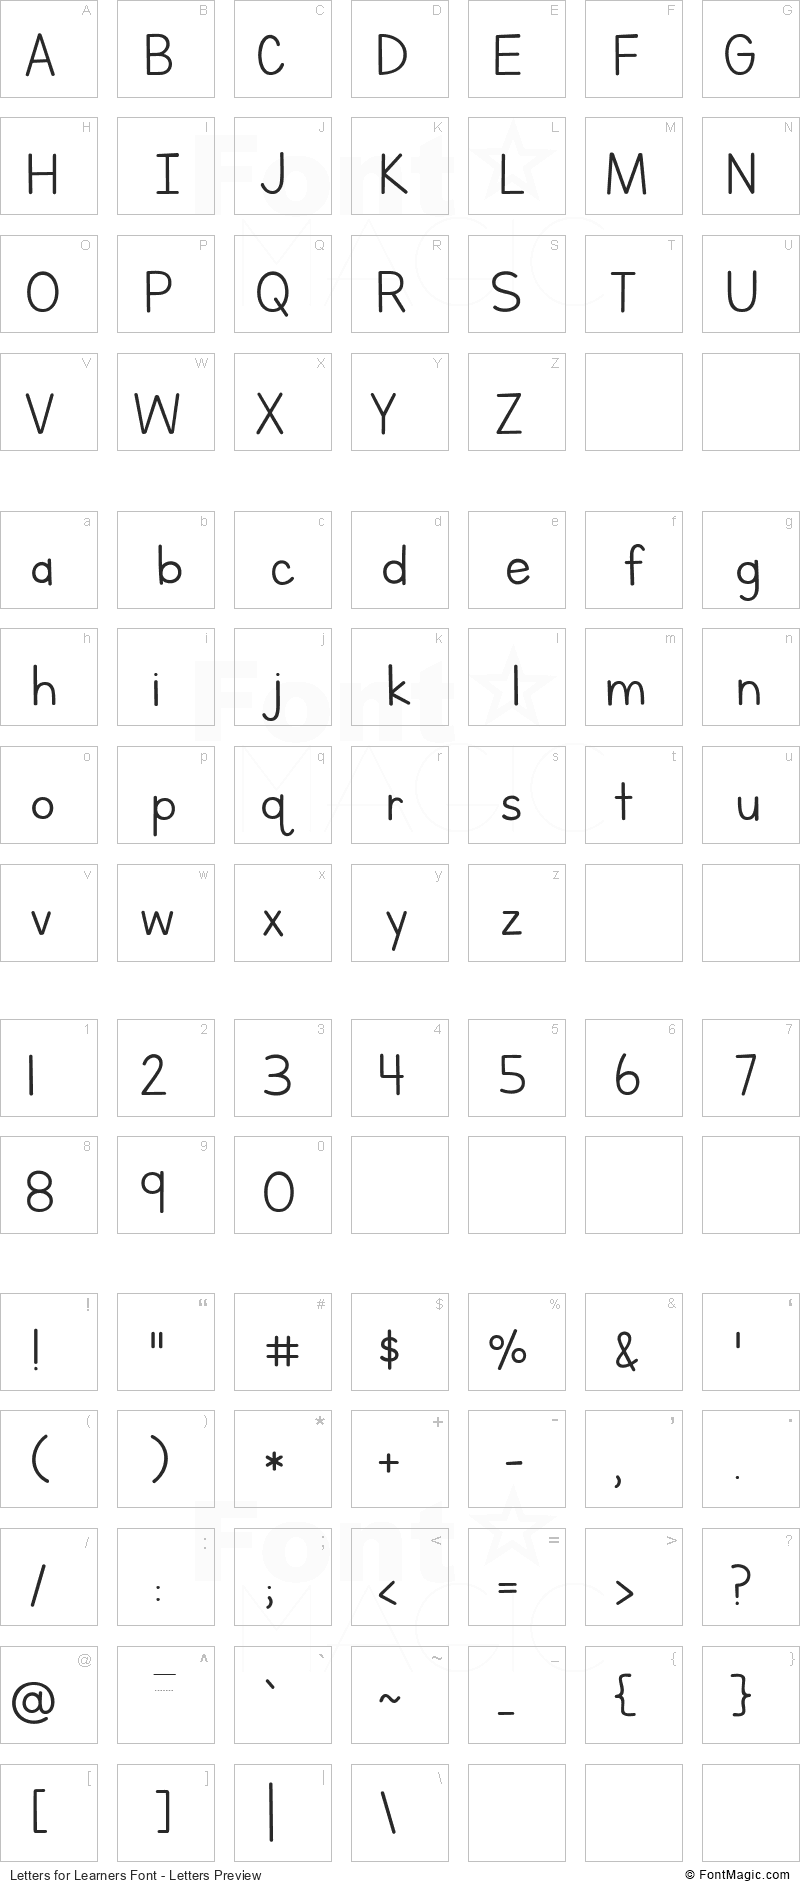 Letters for Learners Font - All Latters Preview Chart